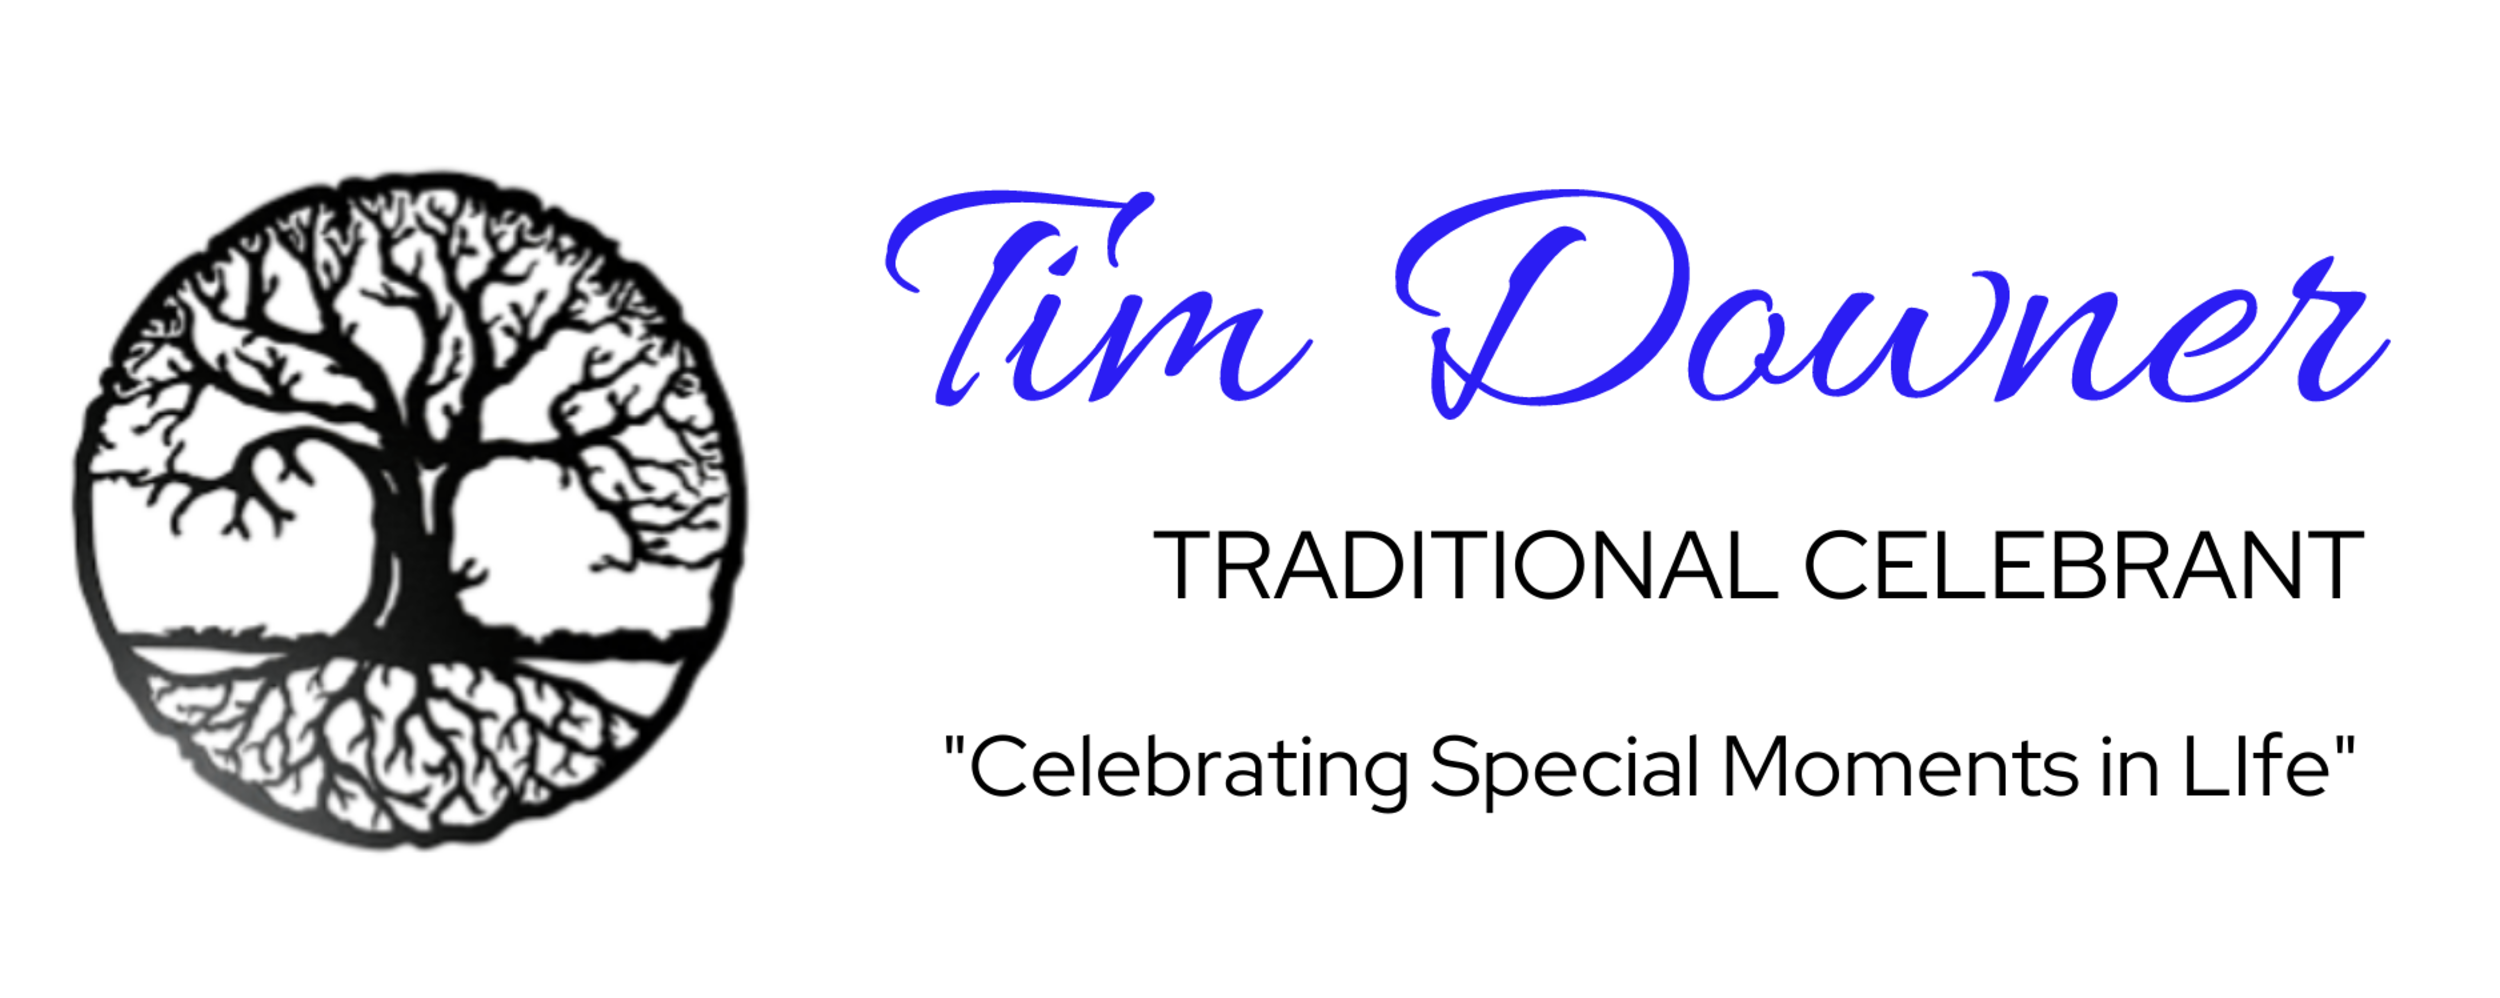 HANDFASTING – A SYMBOLIC CEREMONY WITH A LONG HISTORY – Tim Downer Celebrant